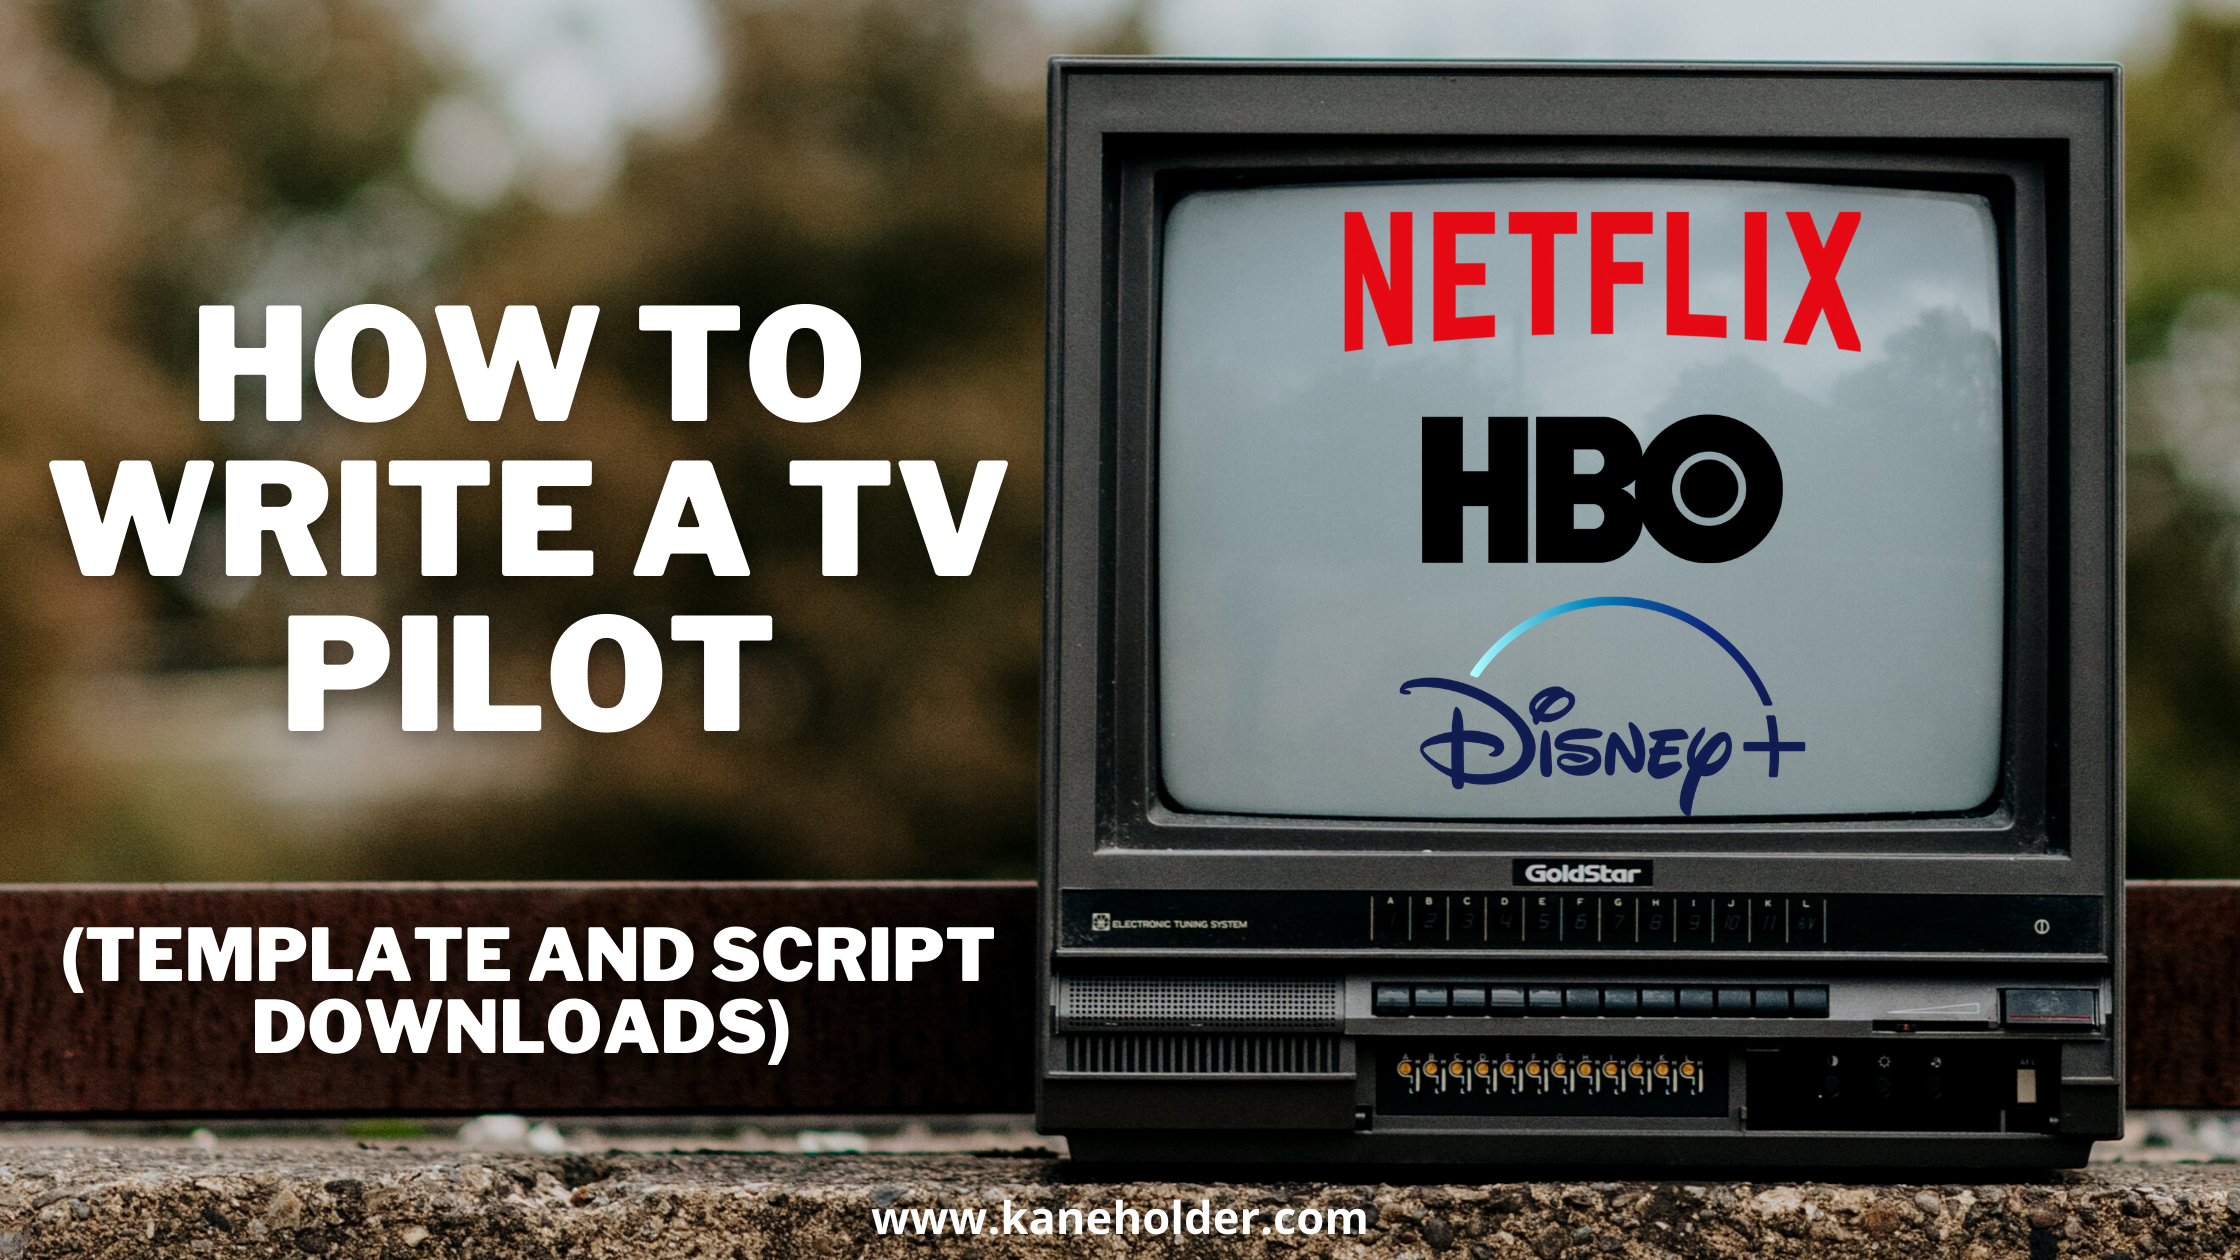 How to Write a TV Pilot [Template and Script Downloads